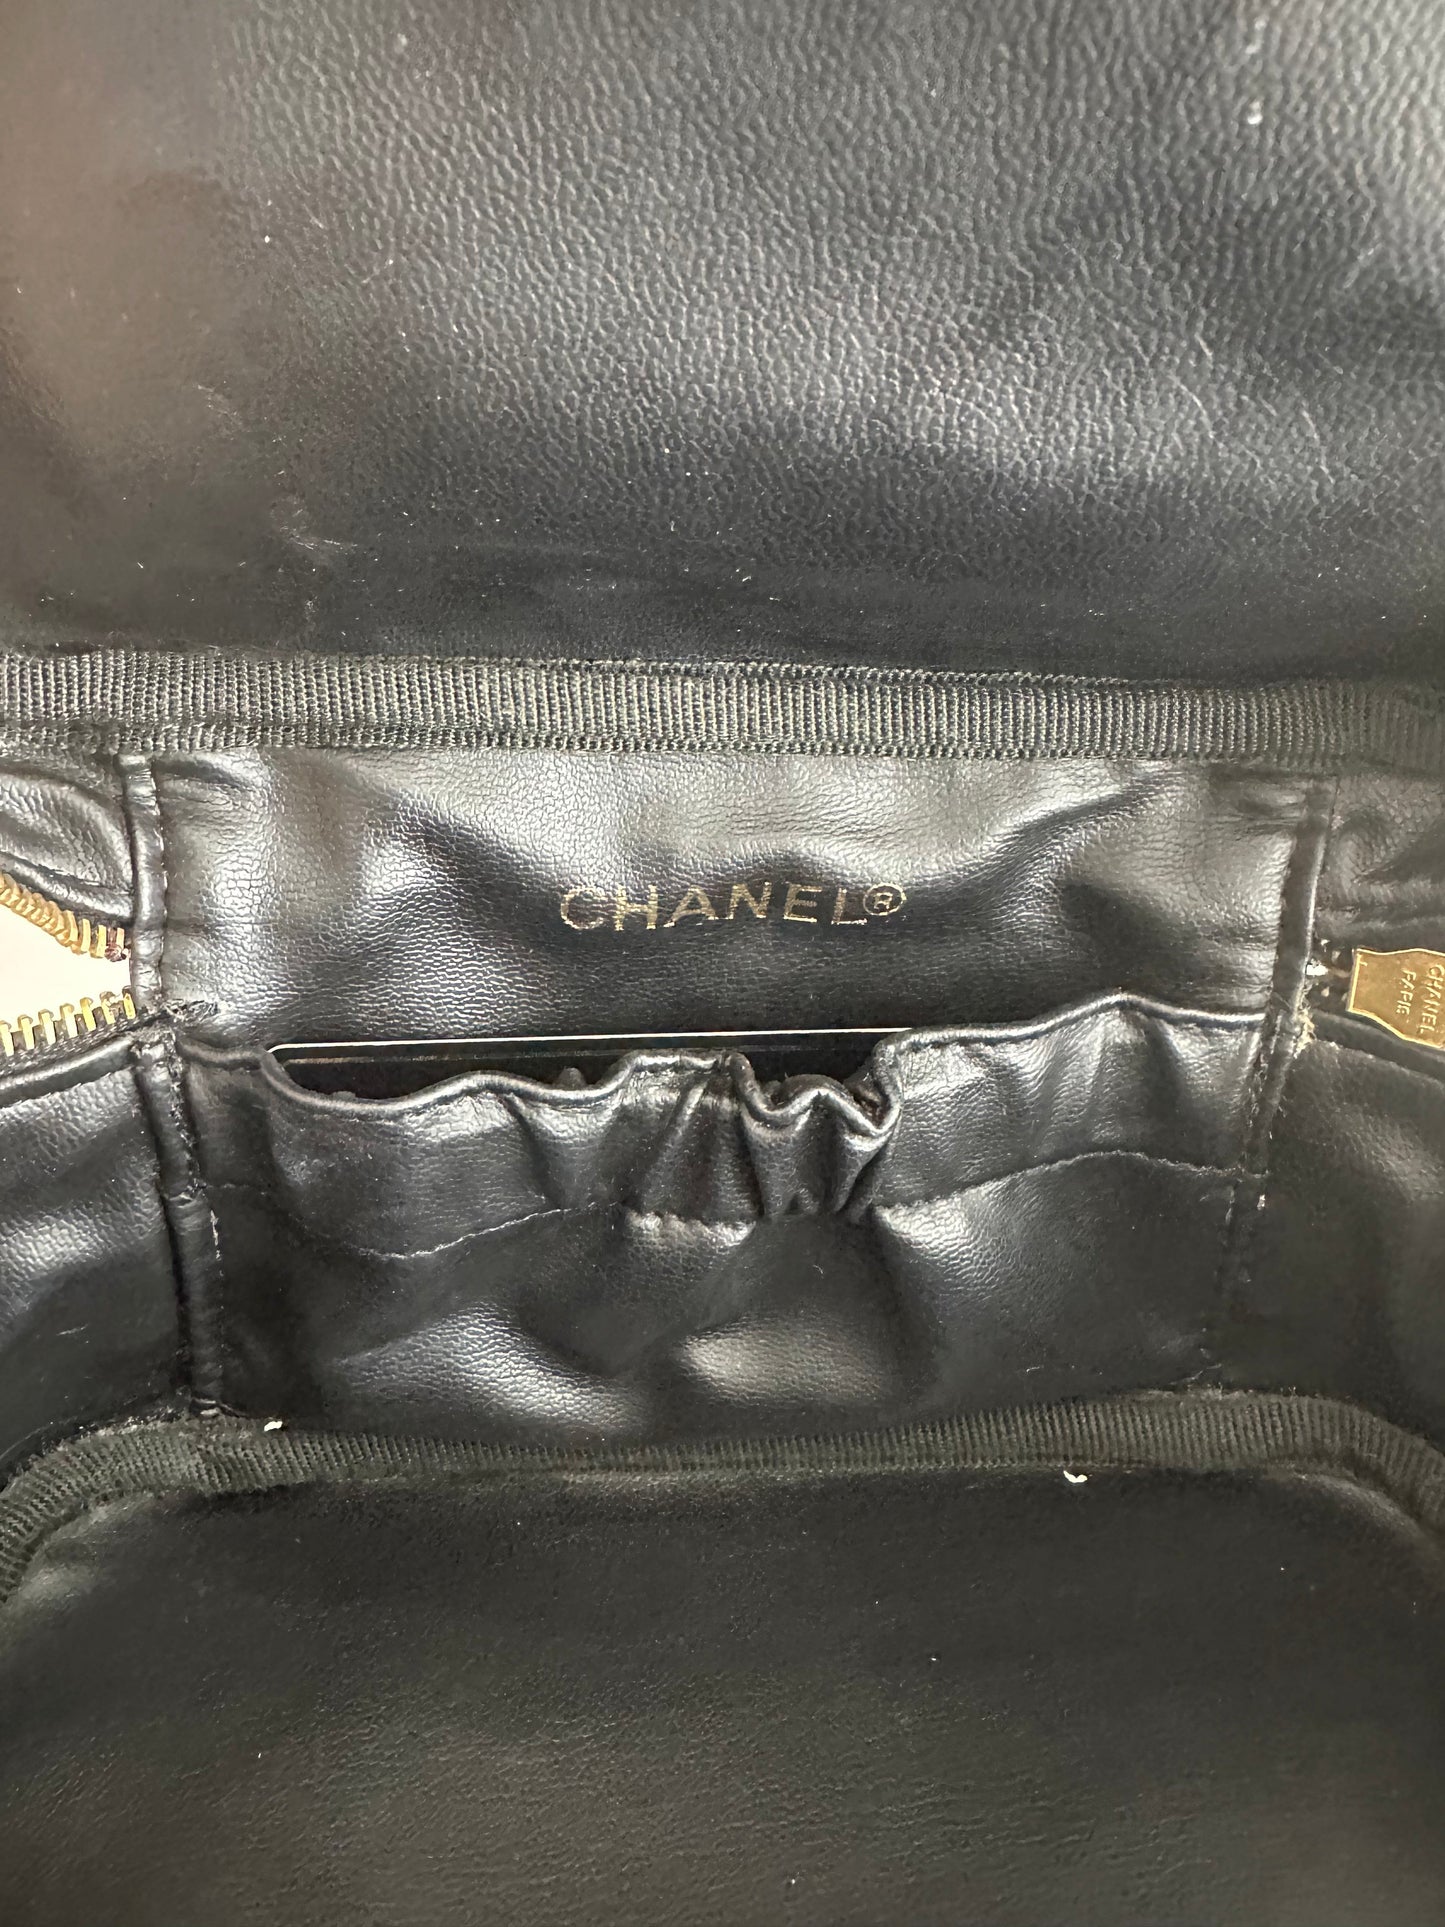 Vintage Chanel Black Leather Vanity Case/Cosmetics Pouch